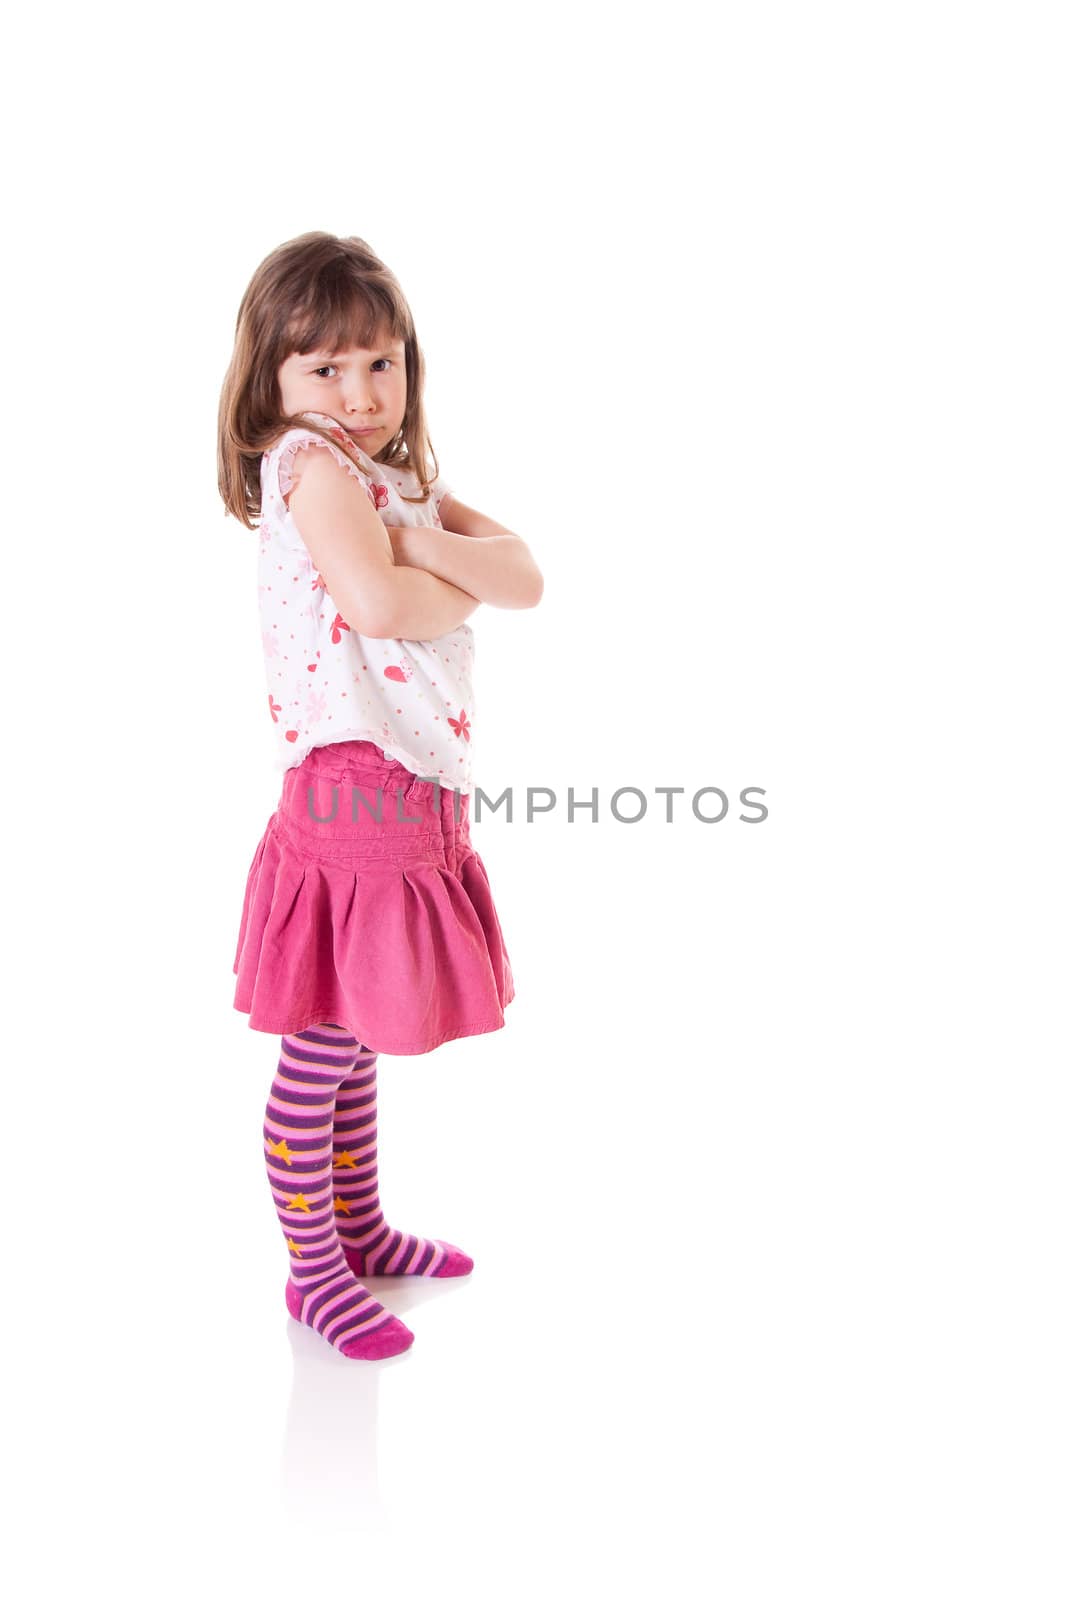 Cute little girl in a bad-tempered mood